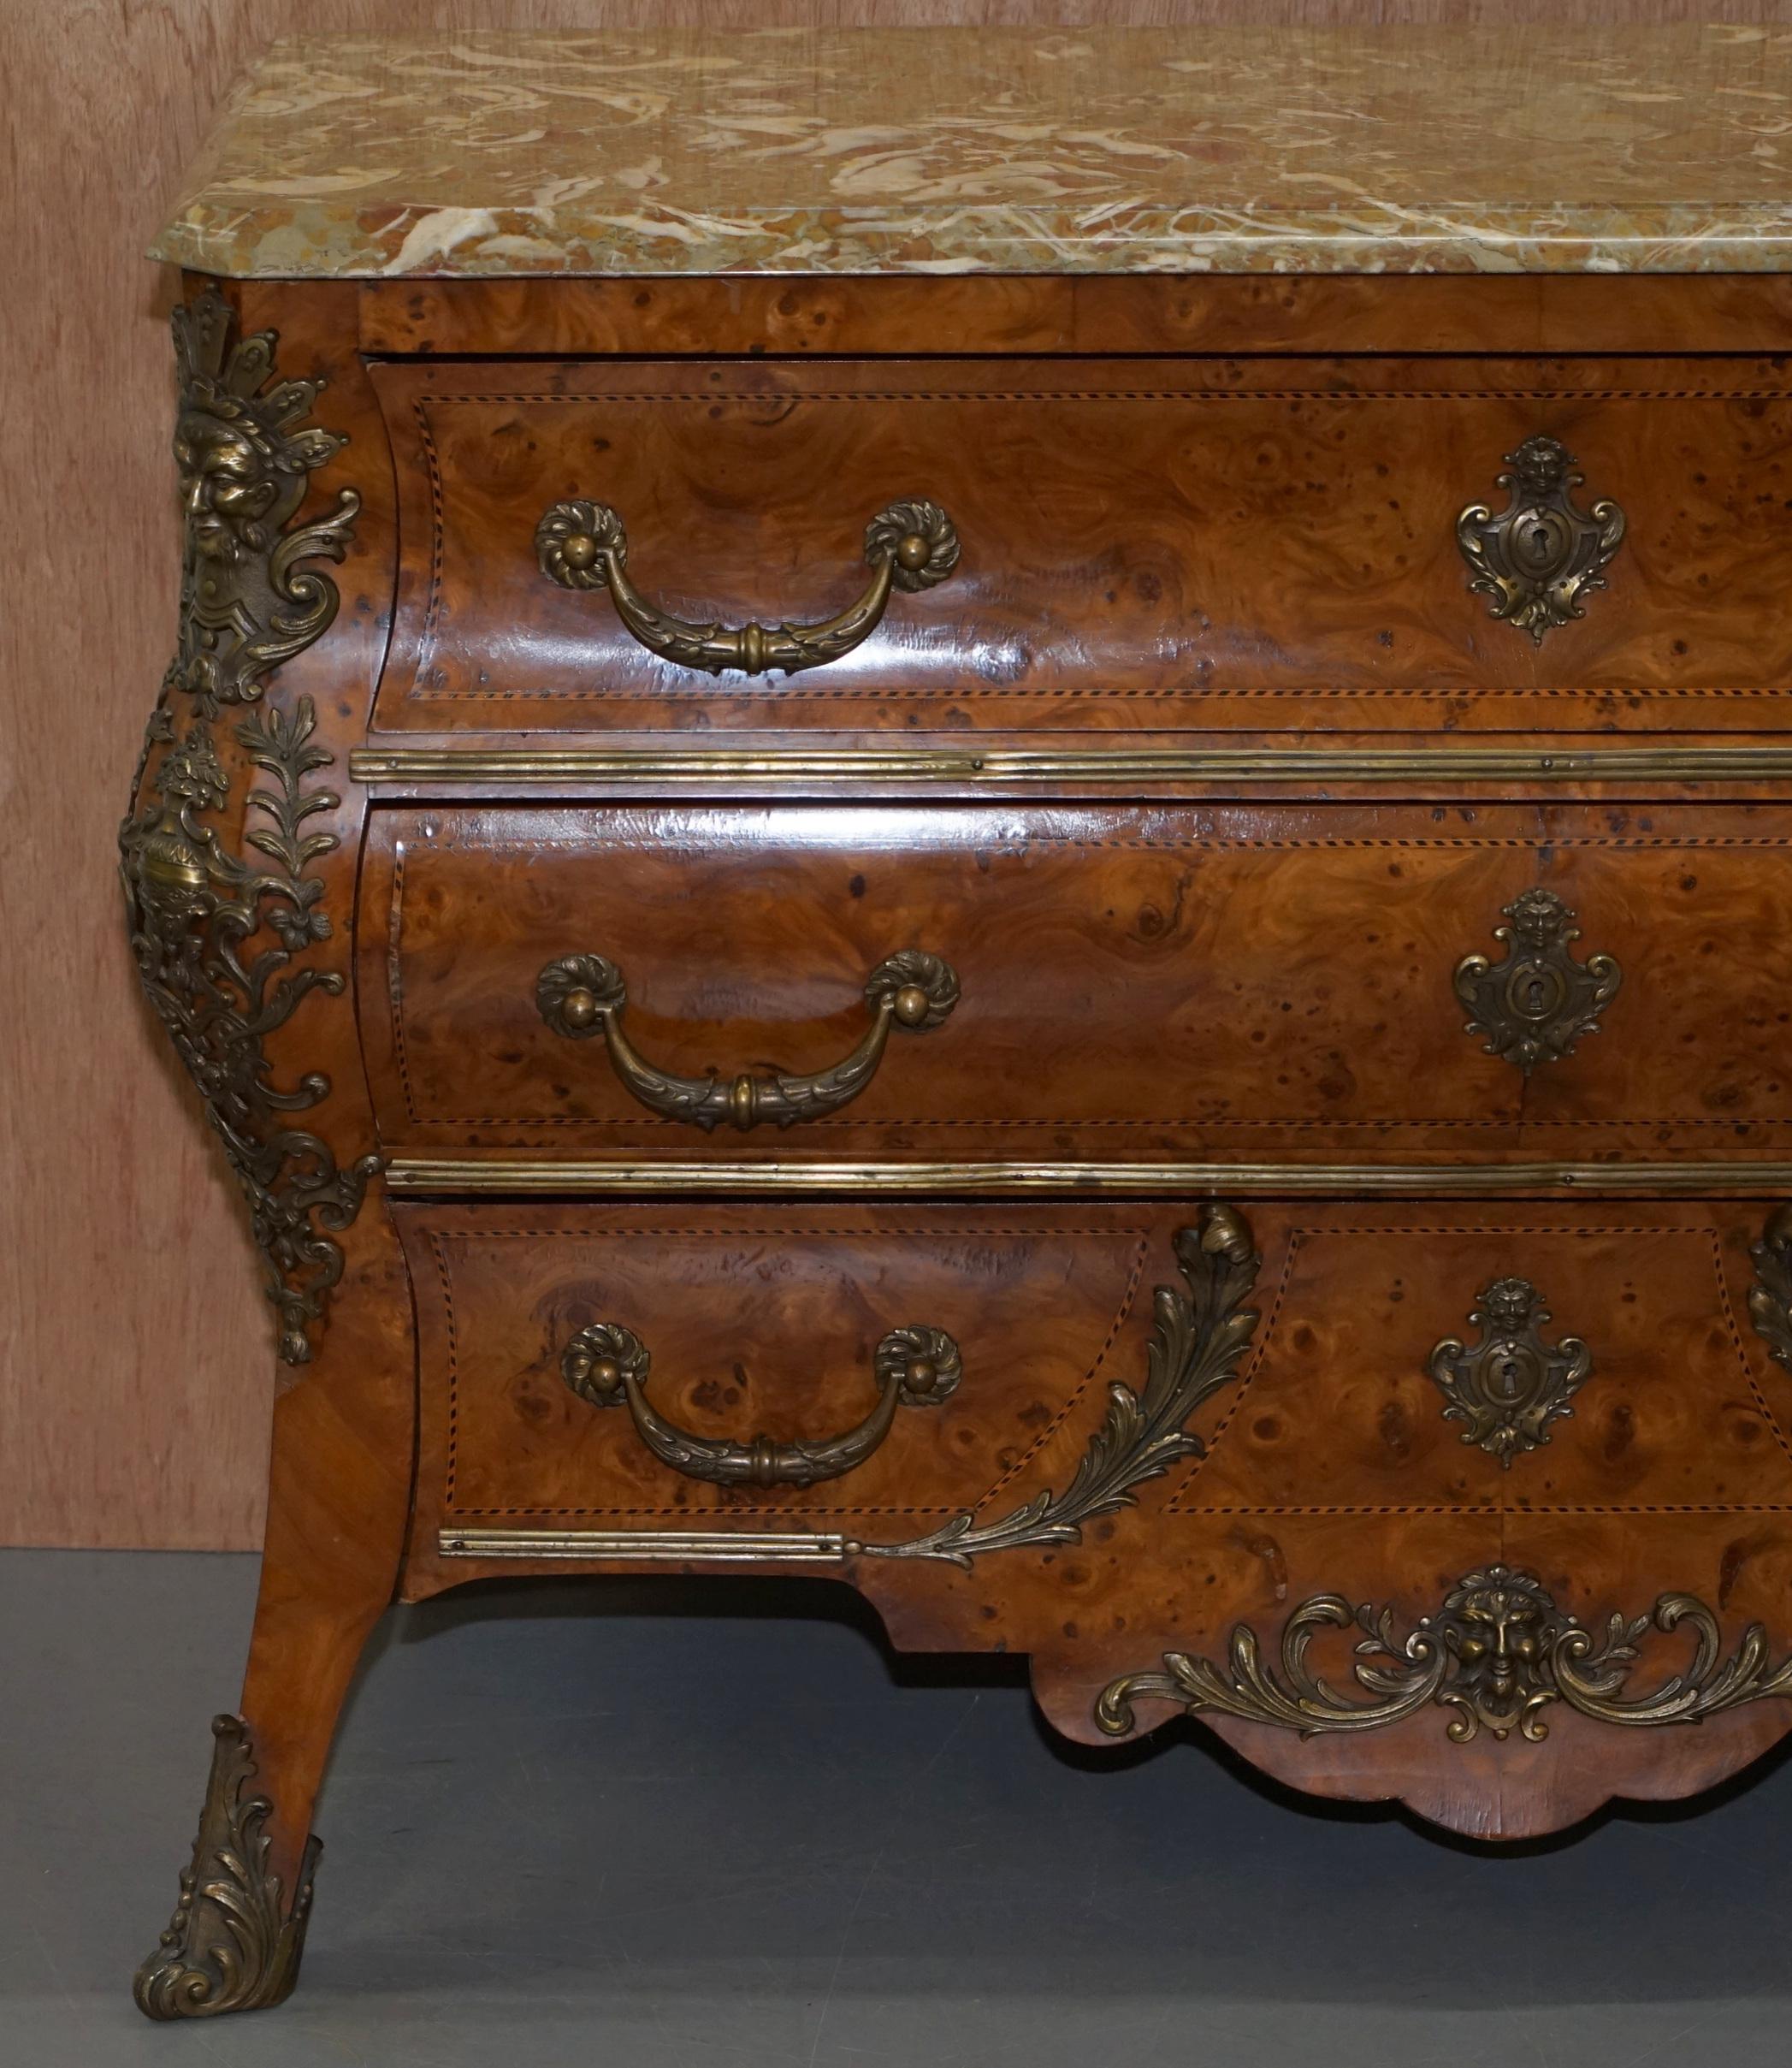 Early 20th Century French Burr Walnut Bronze Fittings Marble-Top Bombe Chest of Drawers, circa 1900